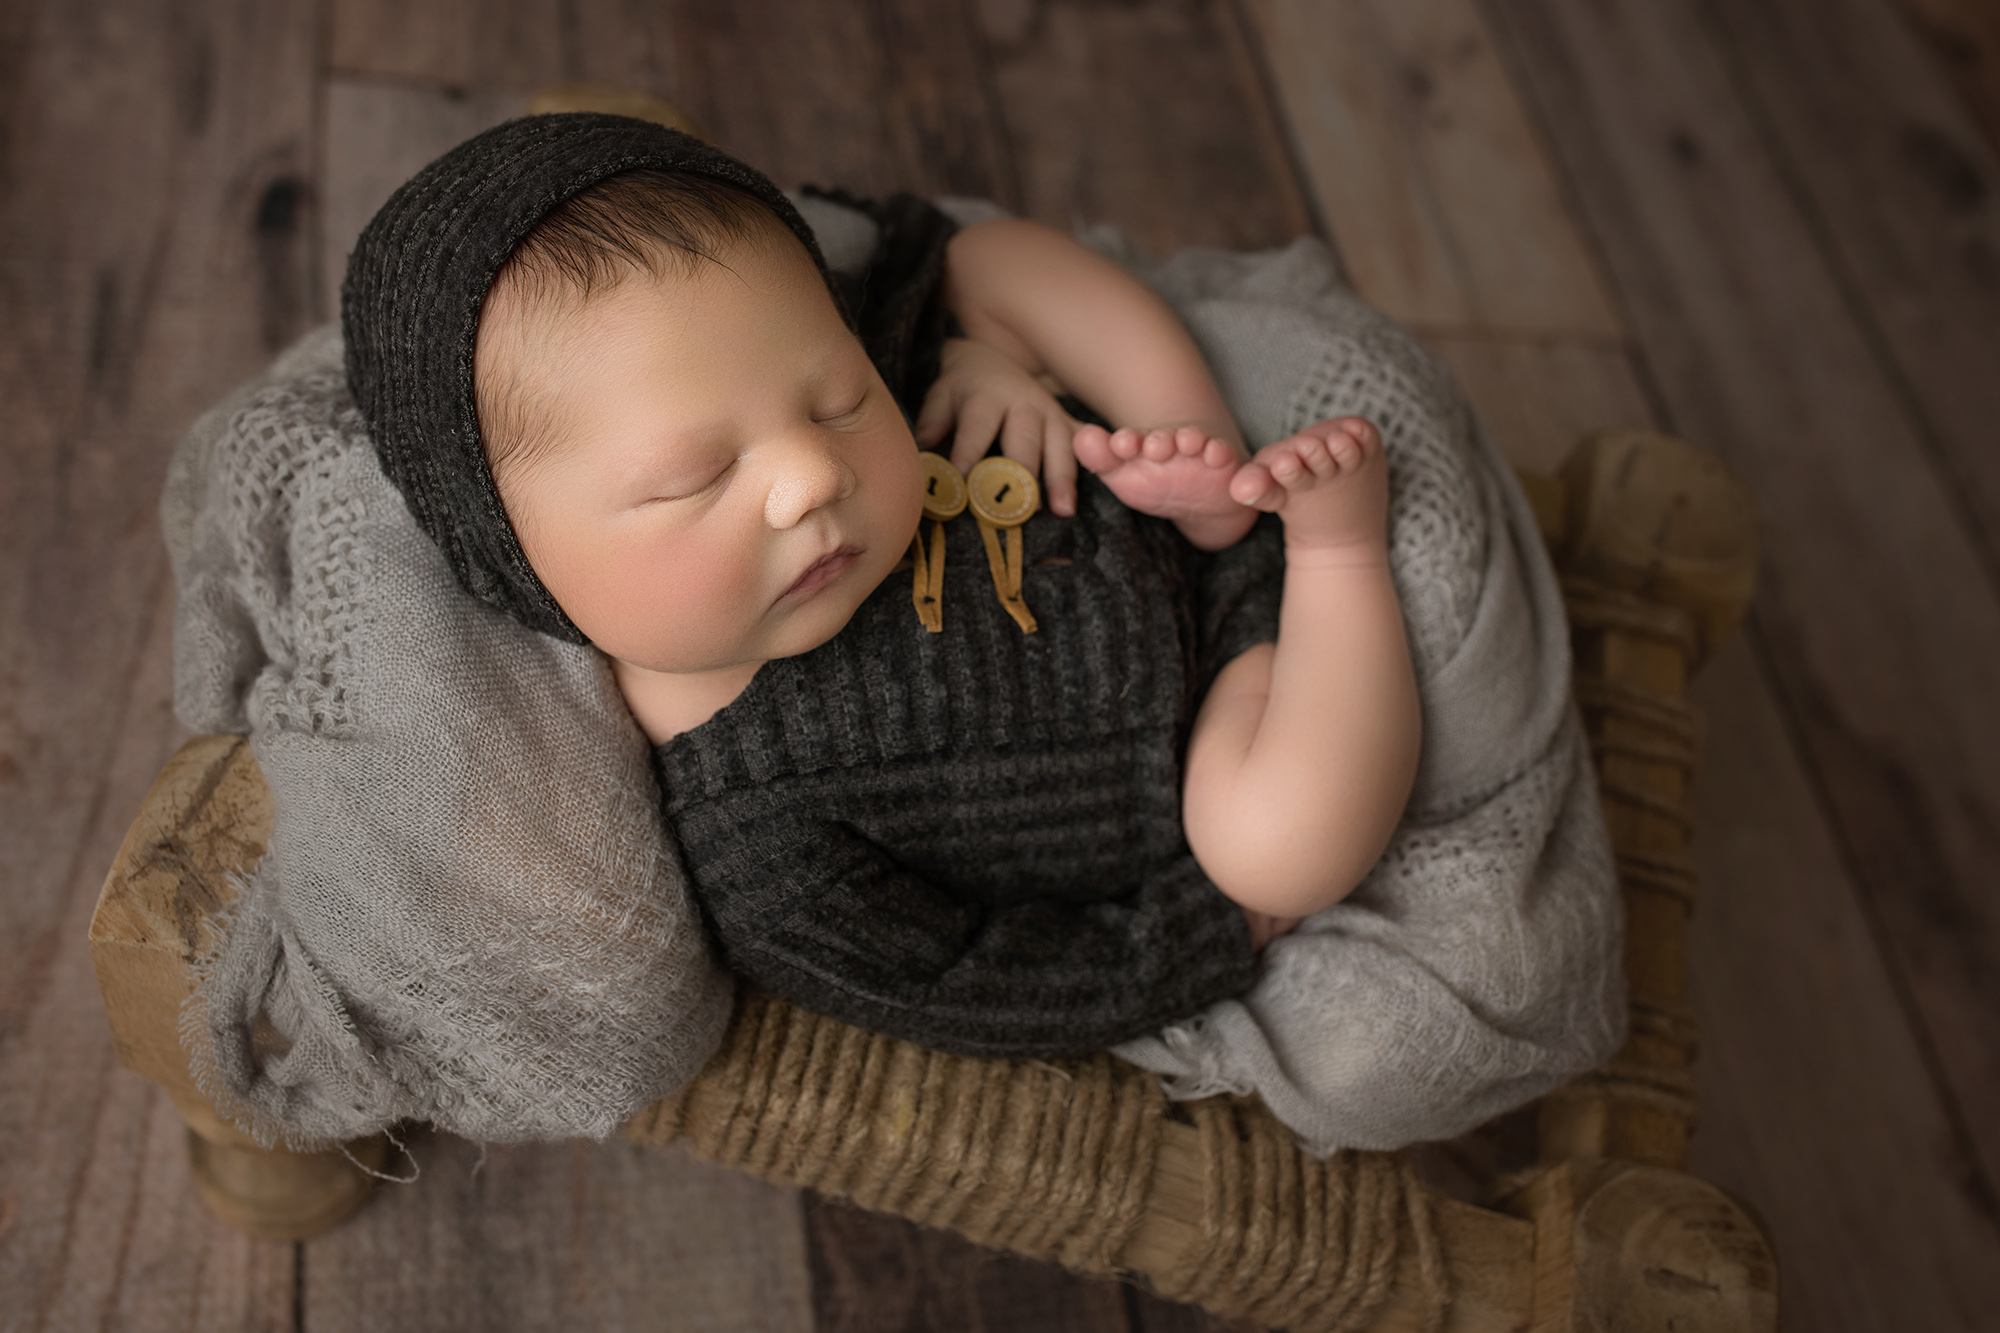 newborn baby boy with gray outfit and matching bonnet laying face up on stool